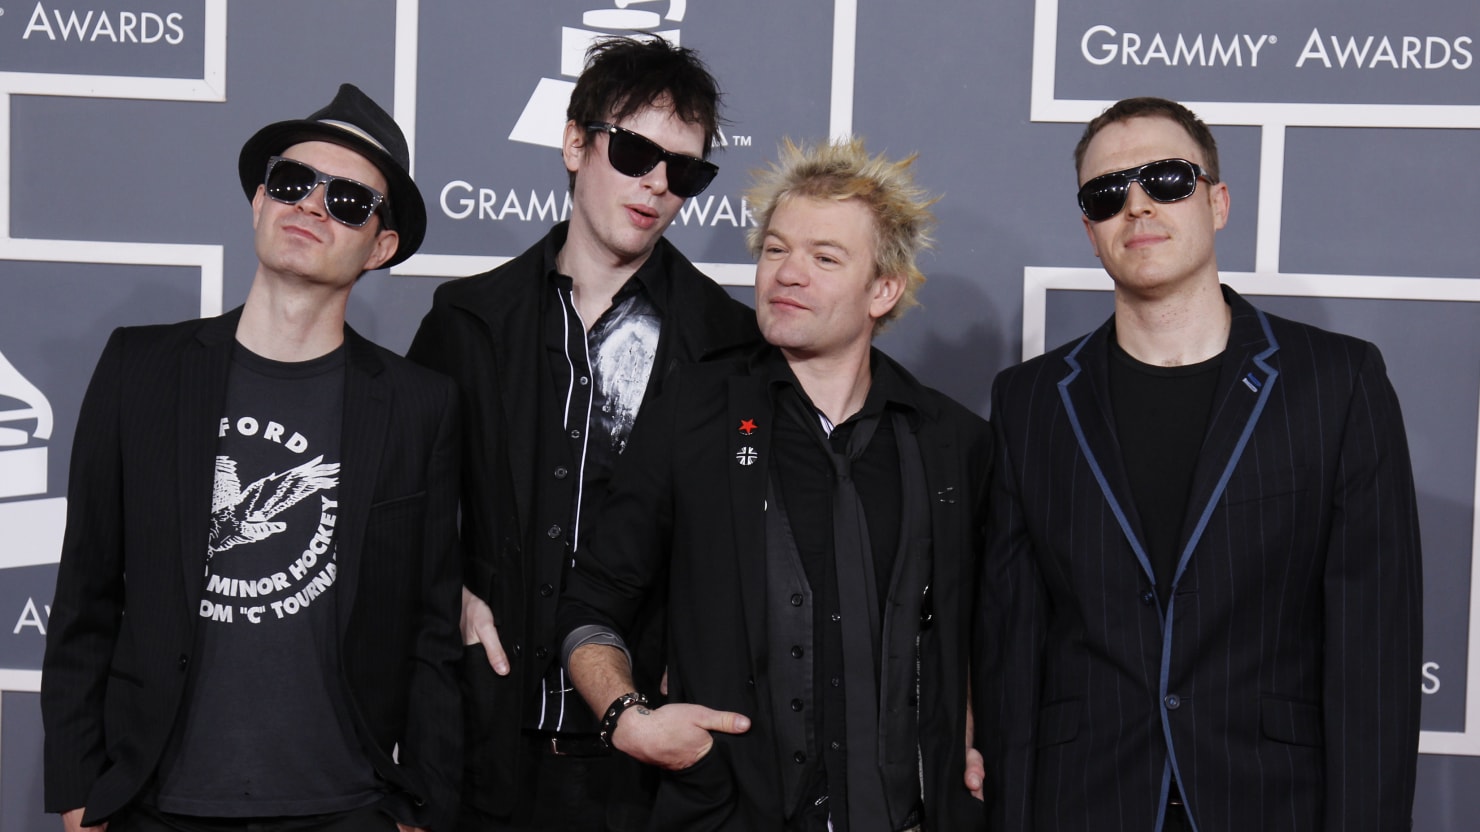 Canadian rock band Sum 41 announces they're breaking up